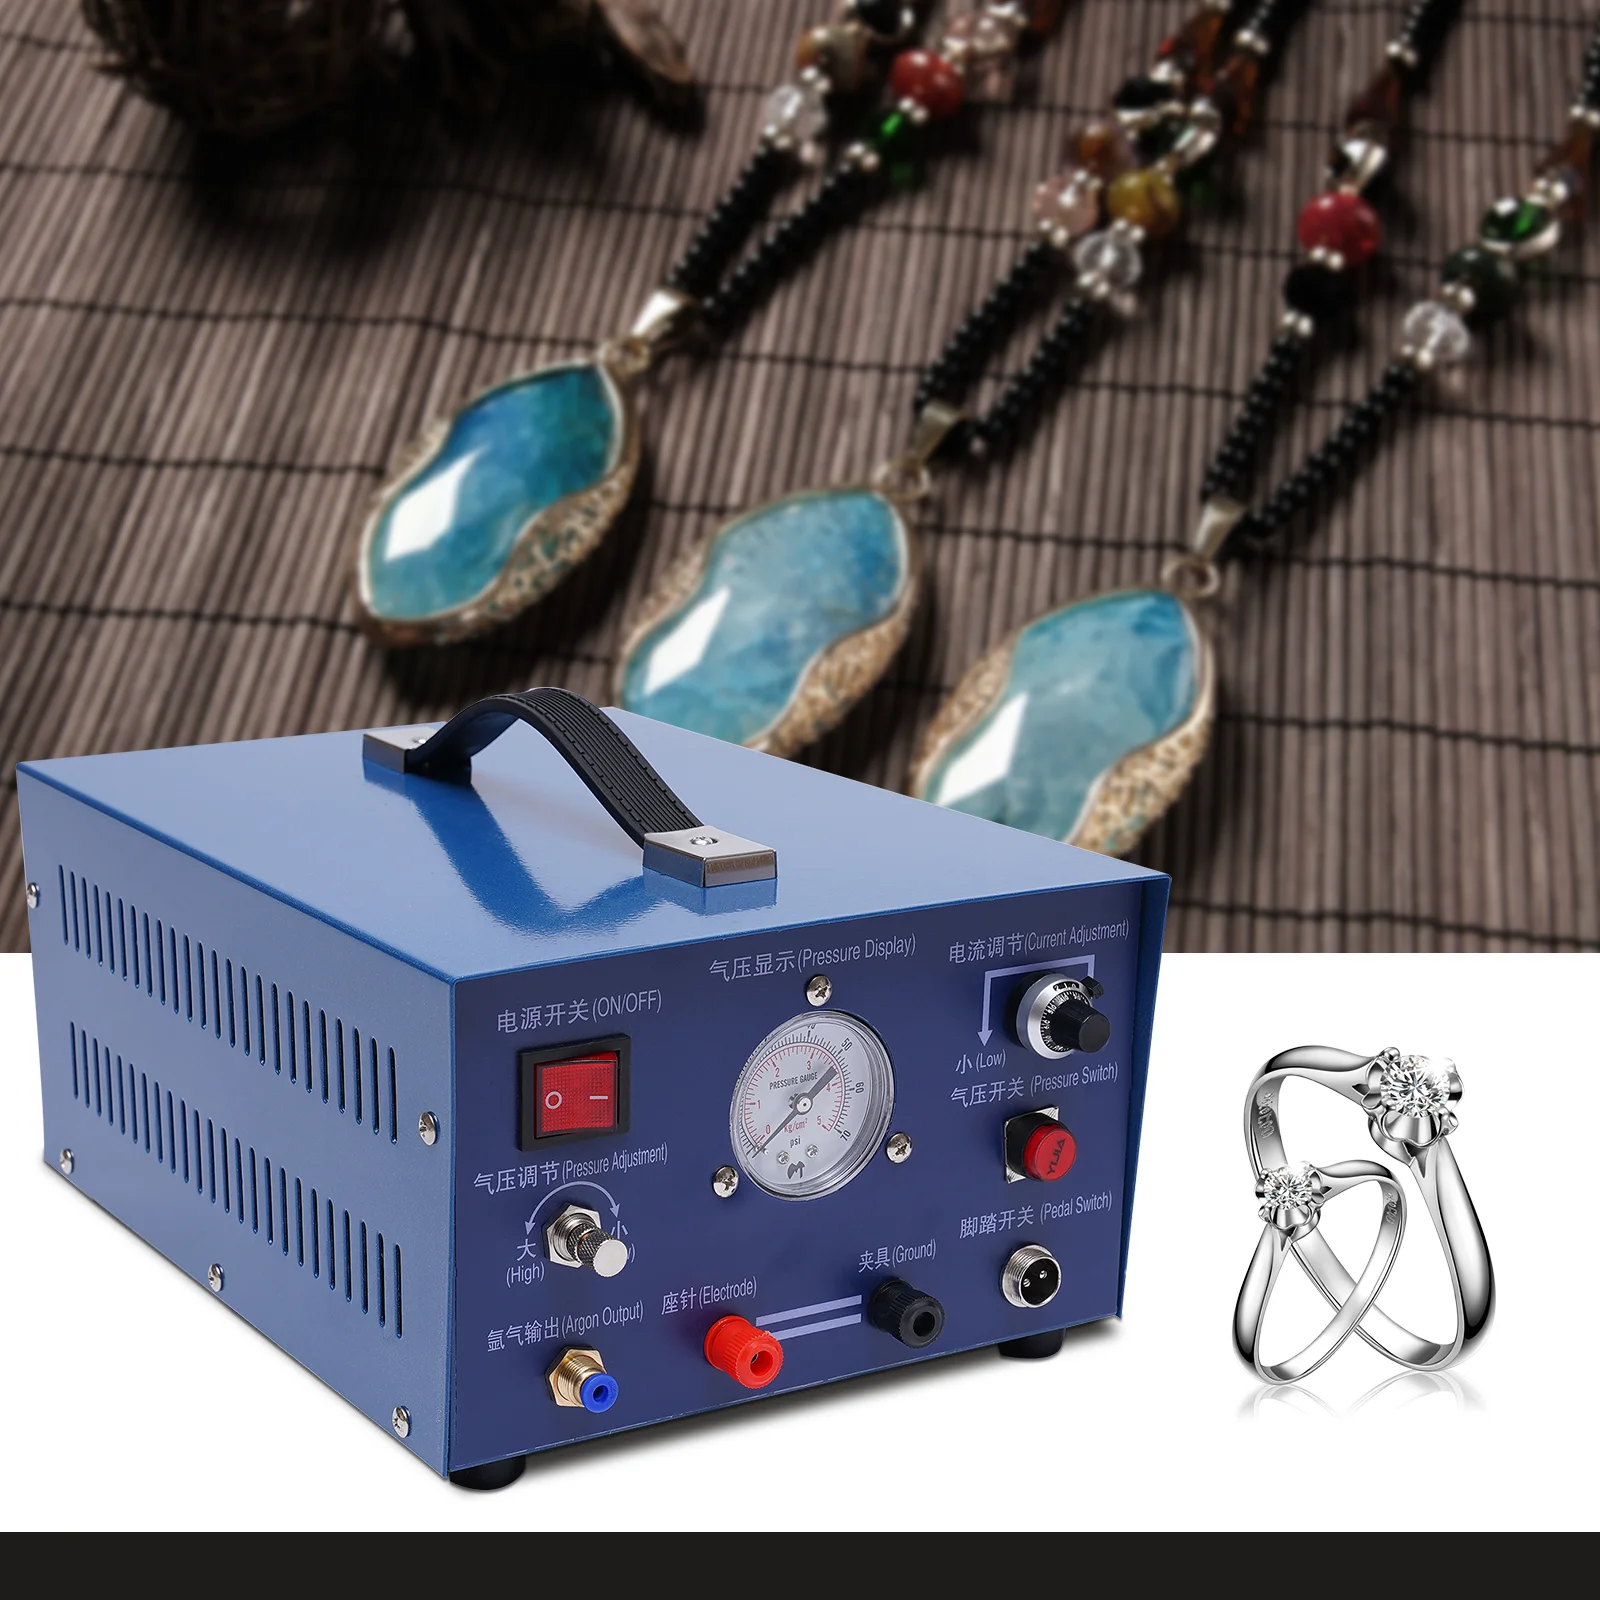 TM Standard Jewelry Soldering Kit with Silver Solder Wire & Butane Torch Kit  for Jewelry Making Project & DIY Projects - AliExpress